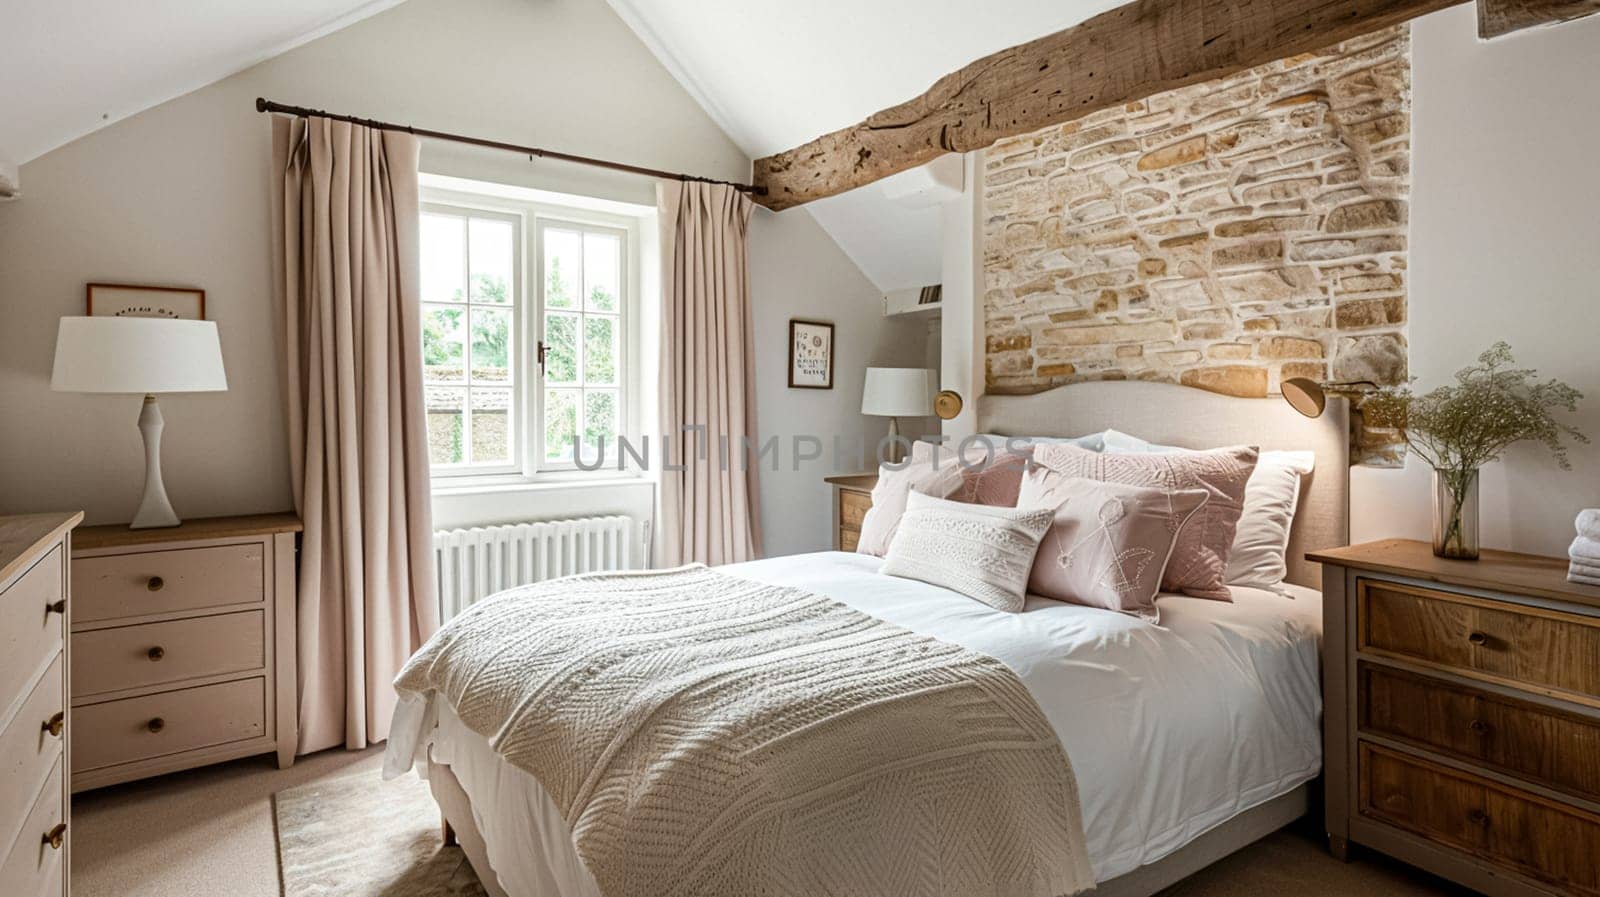 Cotswolds cottage style bedroom decor, interior design and home decor, bed with elegant bedding and bespoke furniture, English countryside house or holiday rental by Anneleven